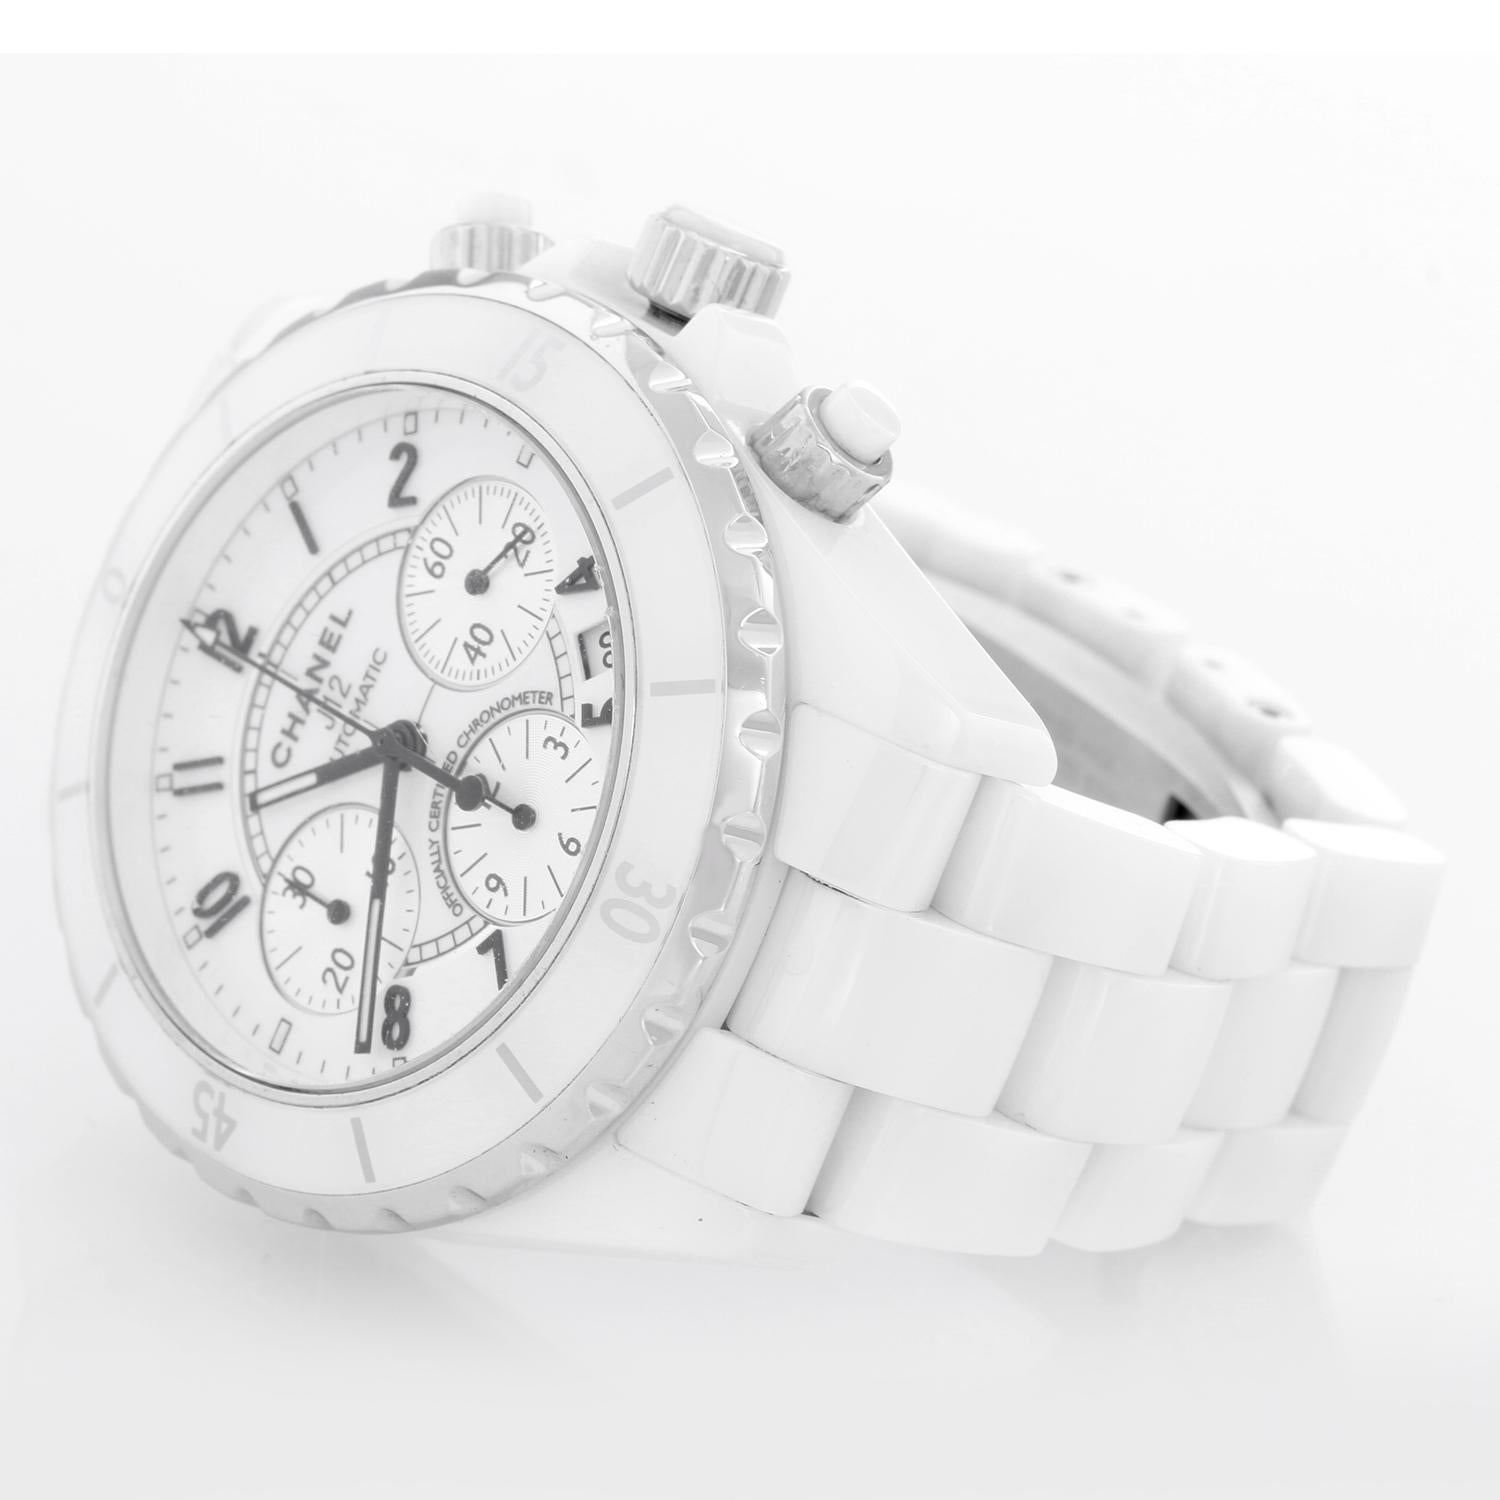 Chanel J12 White Ceramic 41mm Chronograph Watch H1007 - Automatic winding. White ceramic case (41mm diameter). White dial with Arabic numerals; hour, minute and seconds recorders; date between 4 and 5 o'clock. White ceramic J12 bracelet. Pre-owned